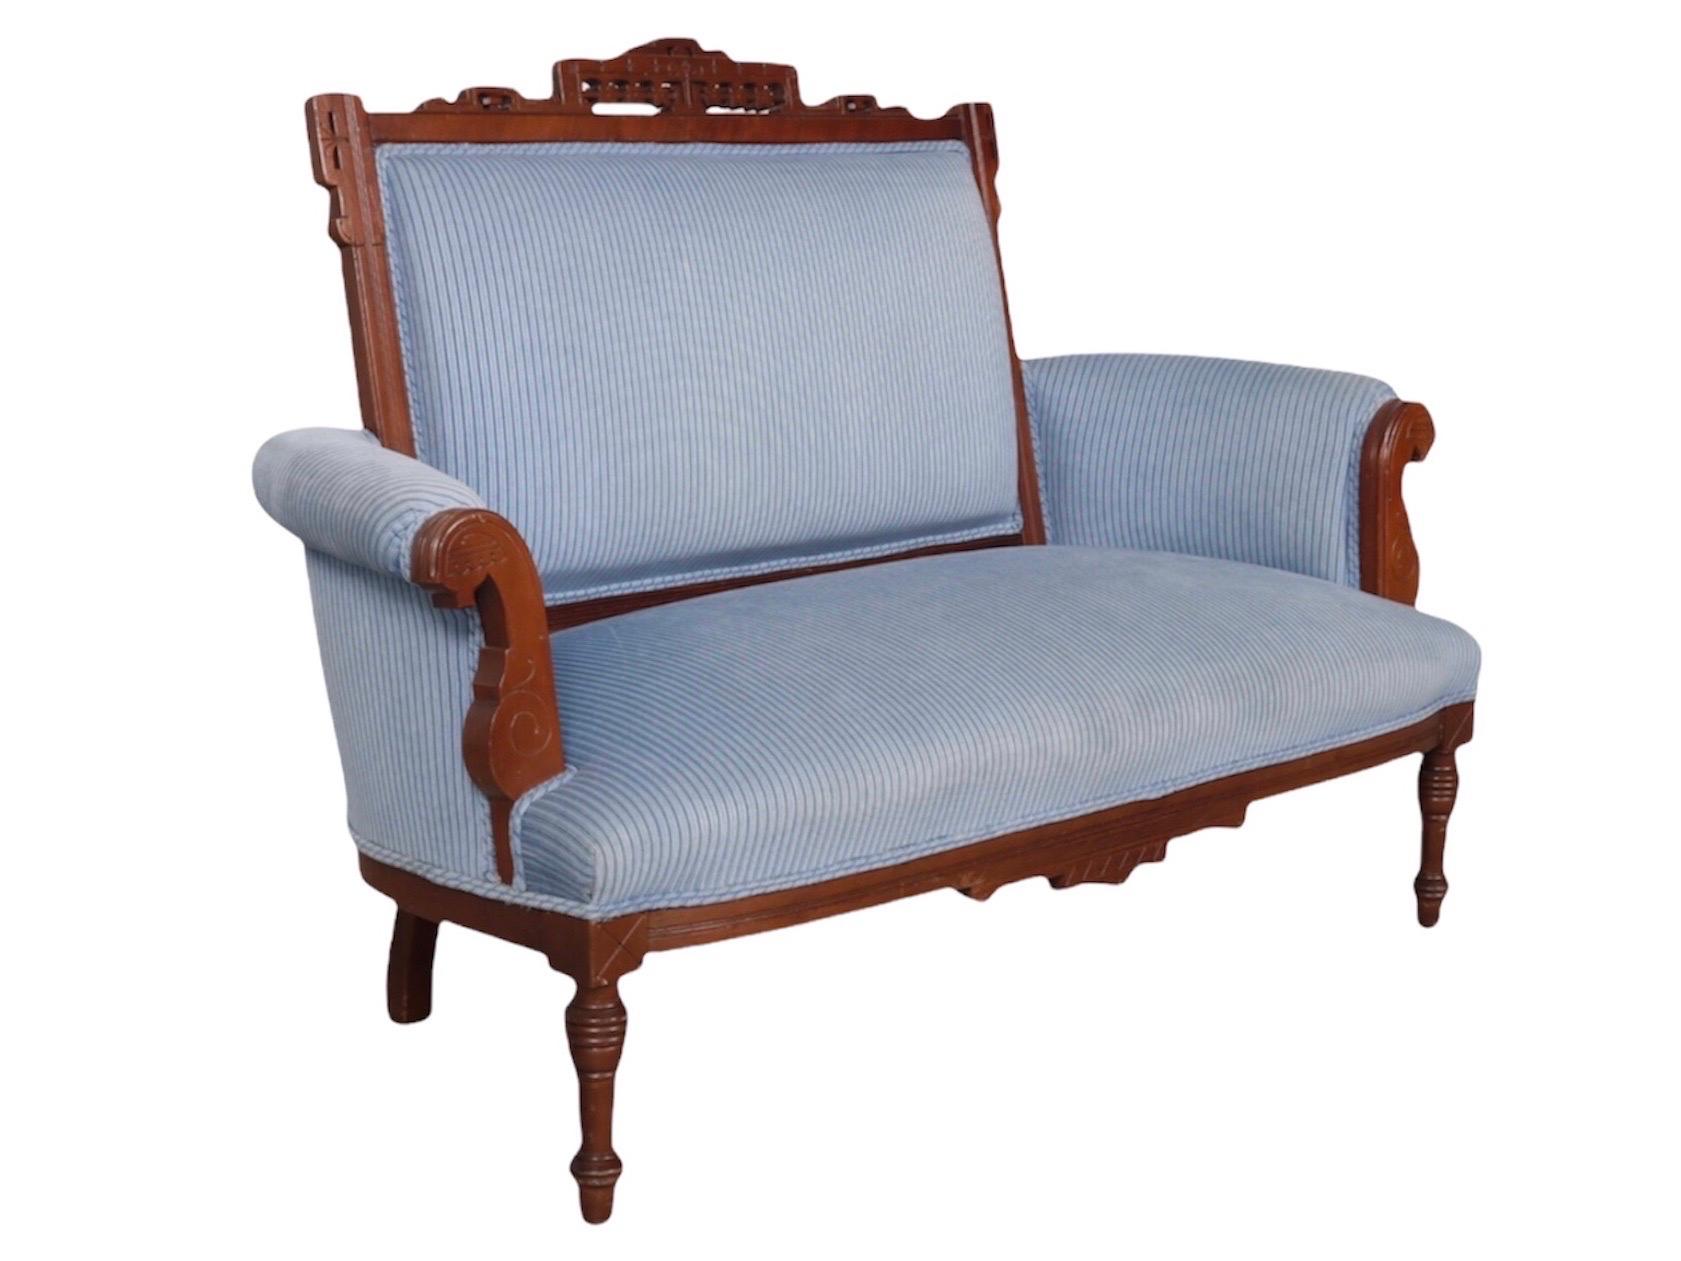 An Eastlake period settee surmounted with a pierced crest rail is carved with a simple floral motif, the shape mirrored in the skirt pediment. Outward rolled arms are finished with wooden panels carved with scrolled details. Round legs taper